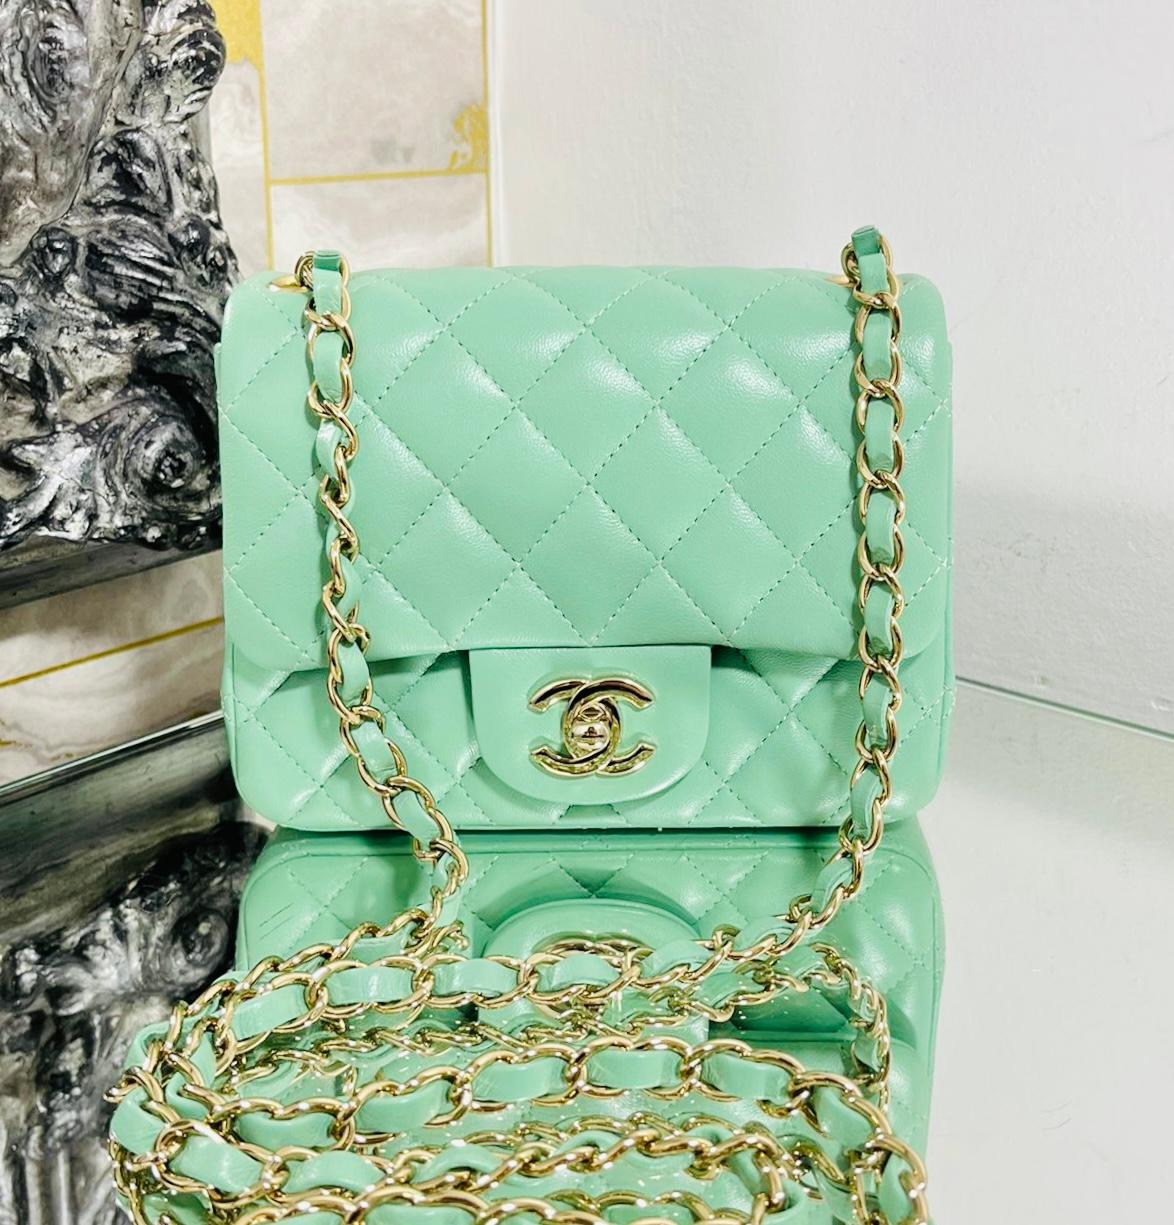 Chanel Timeless Mini Leather Single Flap Bag

Pistachio green bag designed with iconic diamond quilting.

Detailed with interlocking 'CC' turn-lock closure with leather and chain link shoulder strap.

Featuring flap front leading to tonal, leather